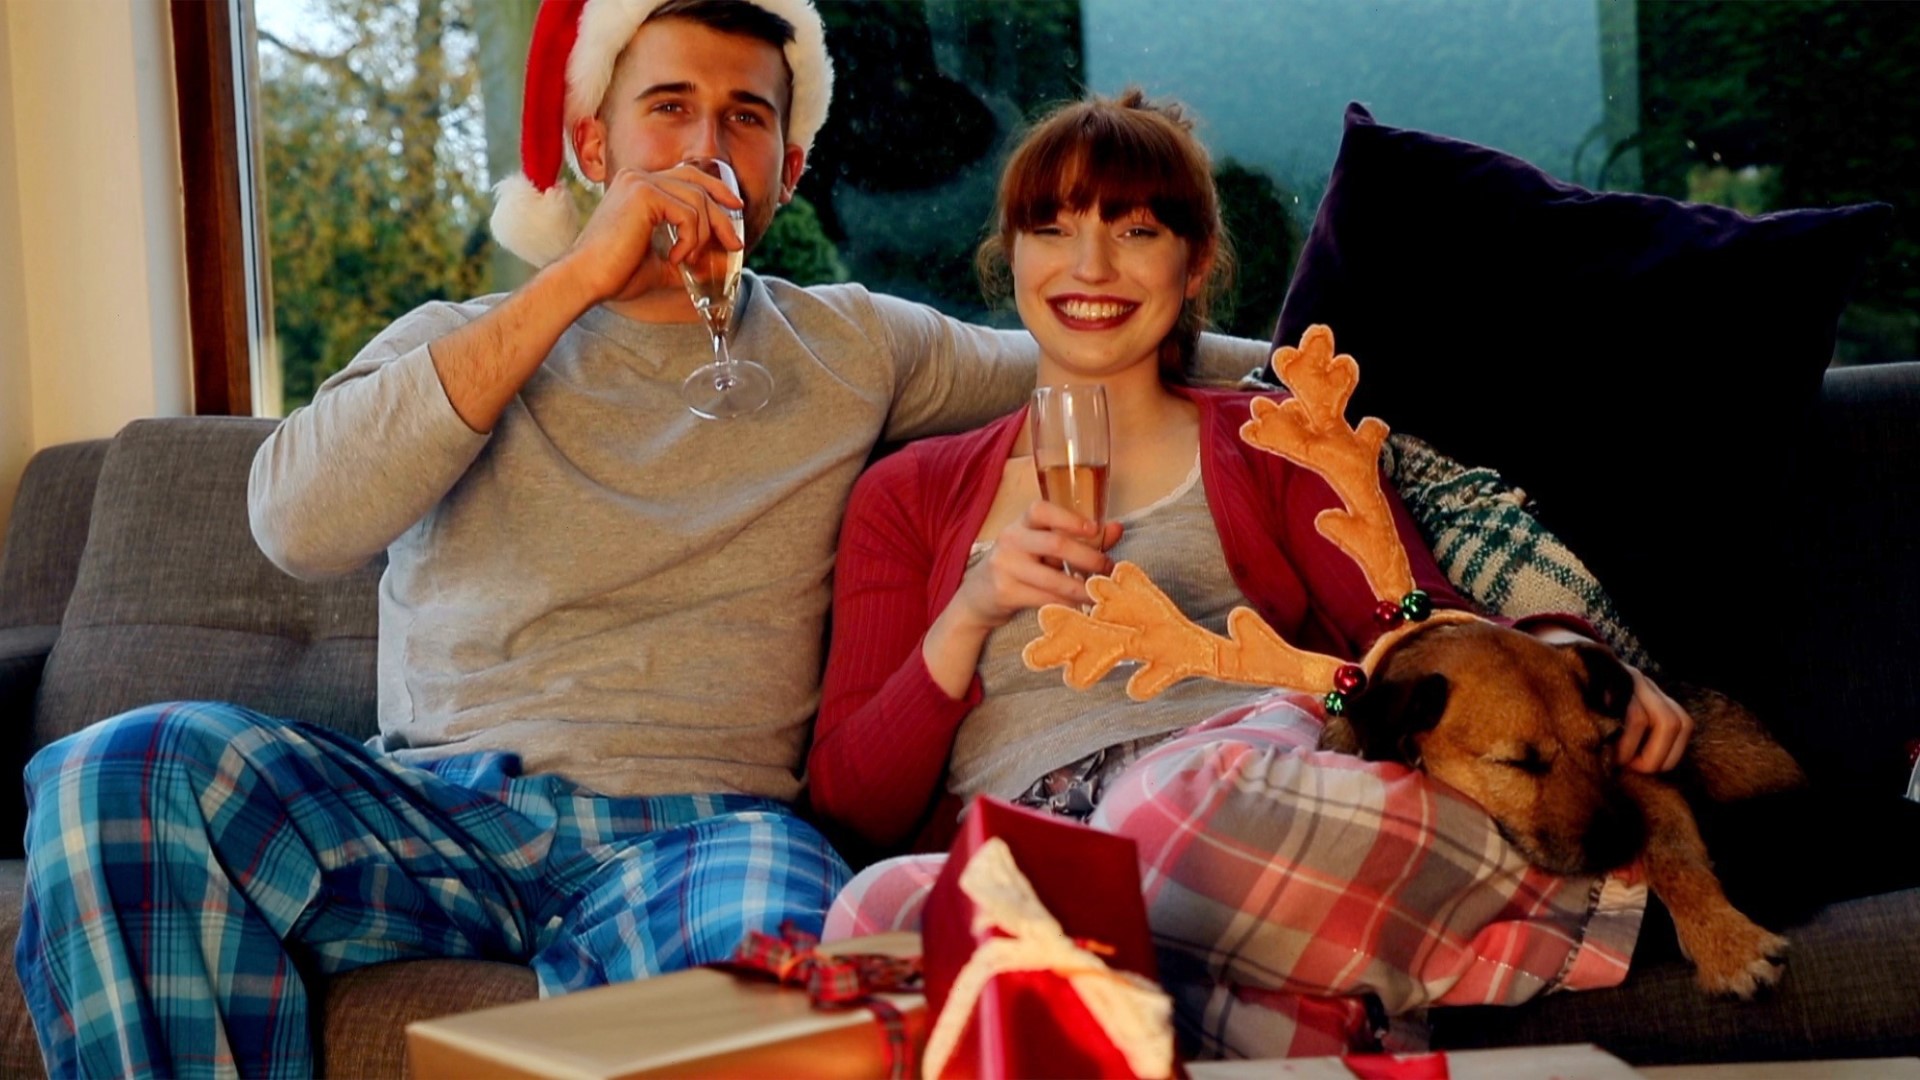 Many Christmas movies are undeniably cheesy, predictable, over-the-top and the acting is questionable, yet year after year they have people hooked. Here are a few reasons why and how to let them inspire you. Buzz60's Johana Restrepo has more.